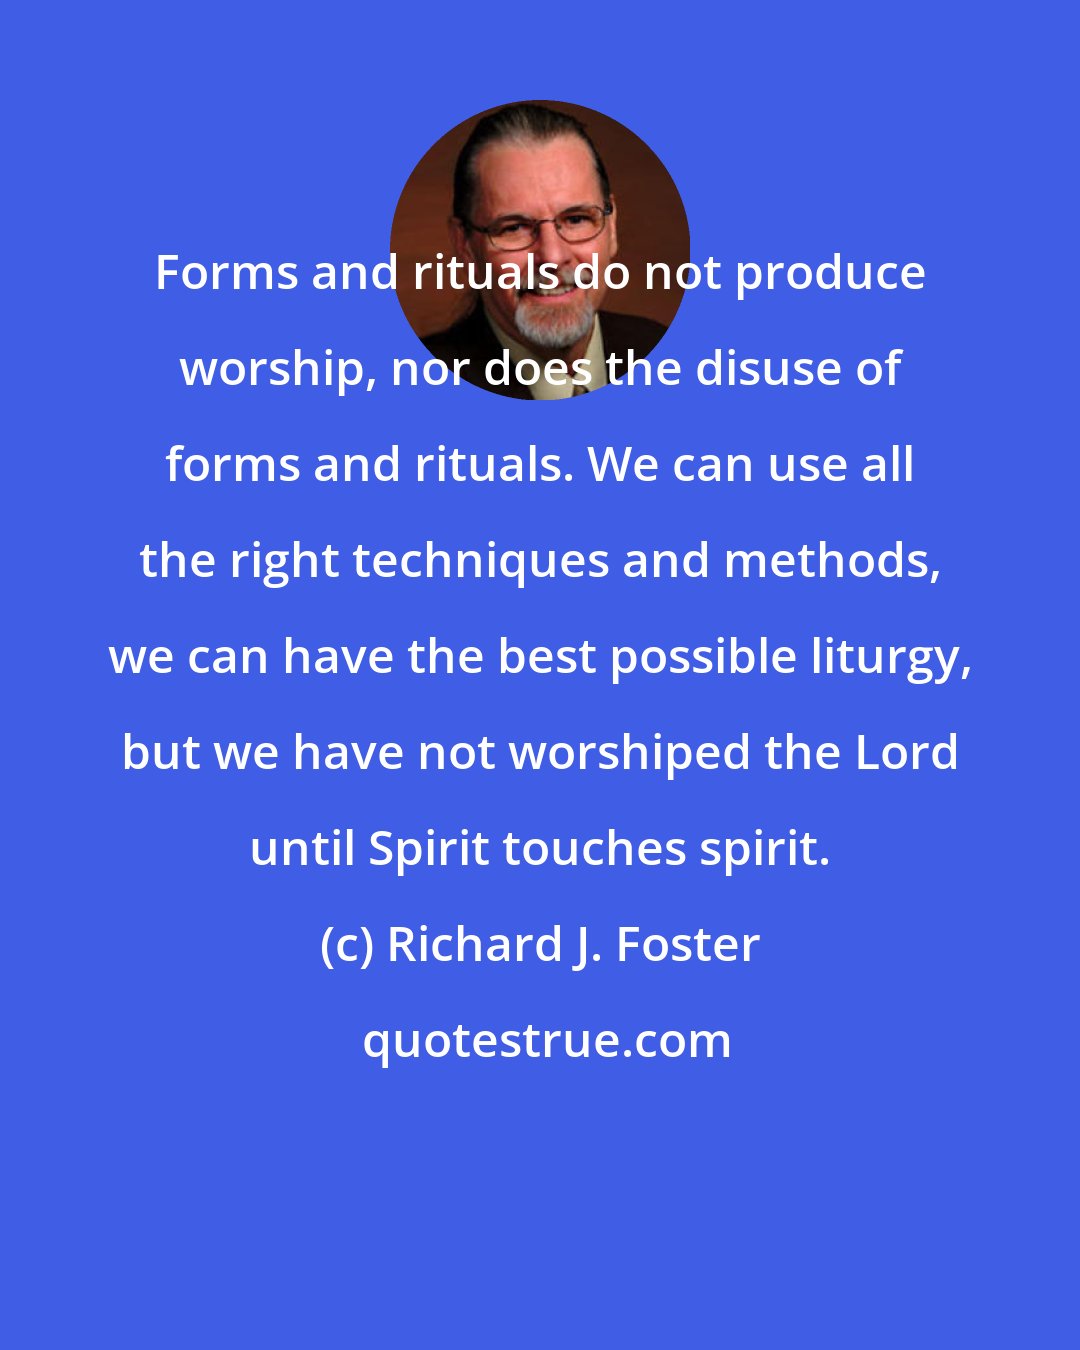 Richard J. Foster: Forms and rituals do not produce worship, nor does the disuse of forms and rituals. We can use all the right techniques and methods, we can have the best possible liturgy, but we have not worshiped the Lord until Spirit touches spirit.